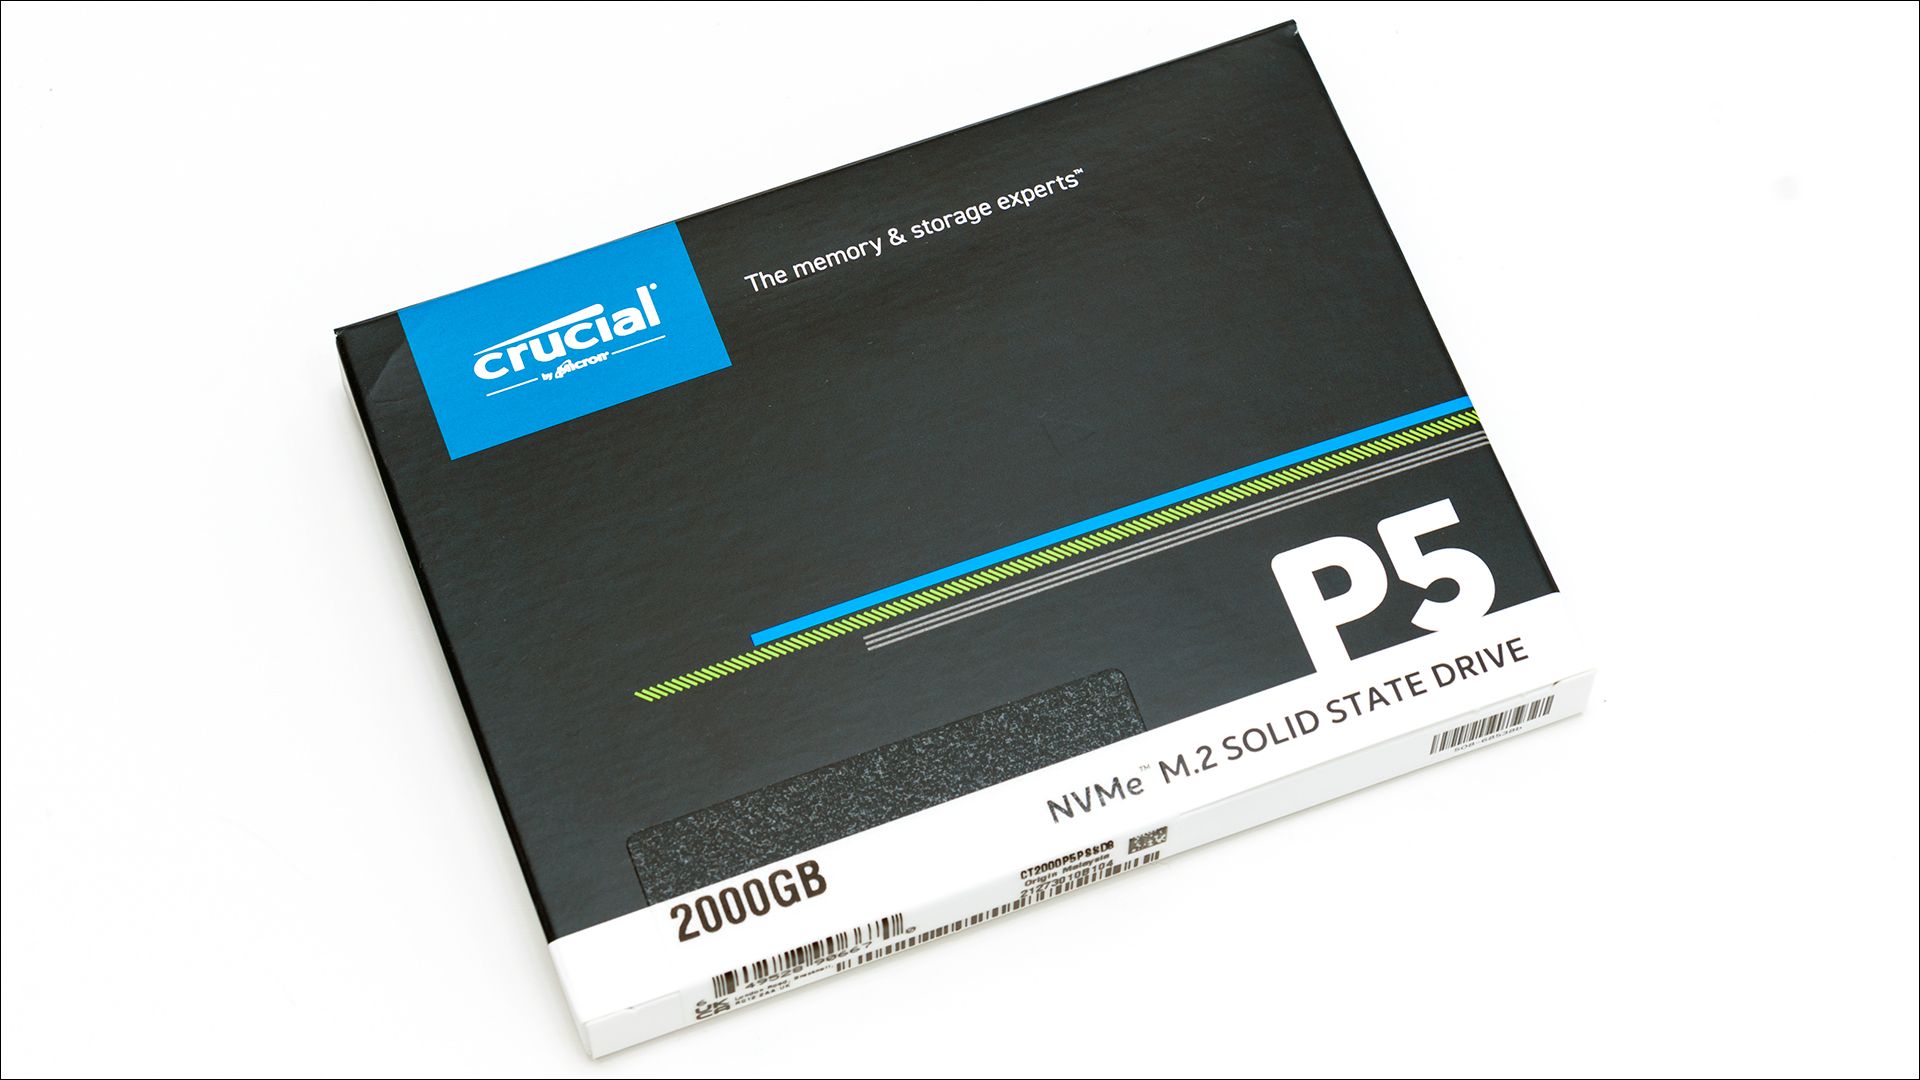 This Crucial P5 Plus 2TB SSD is less than £100 from  in this